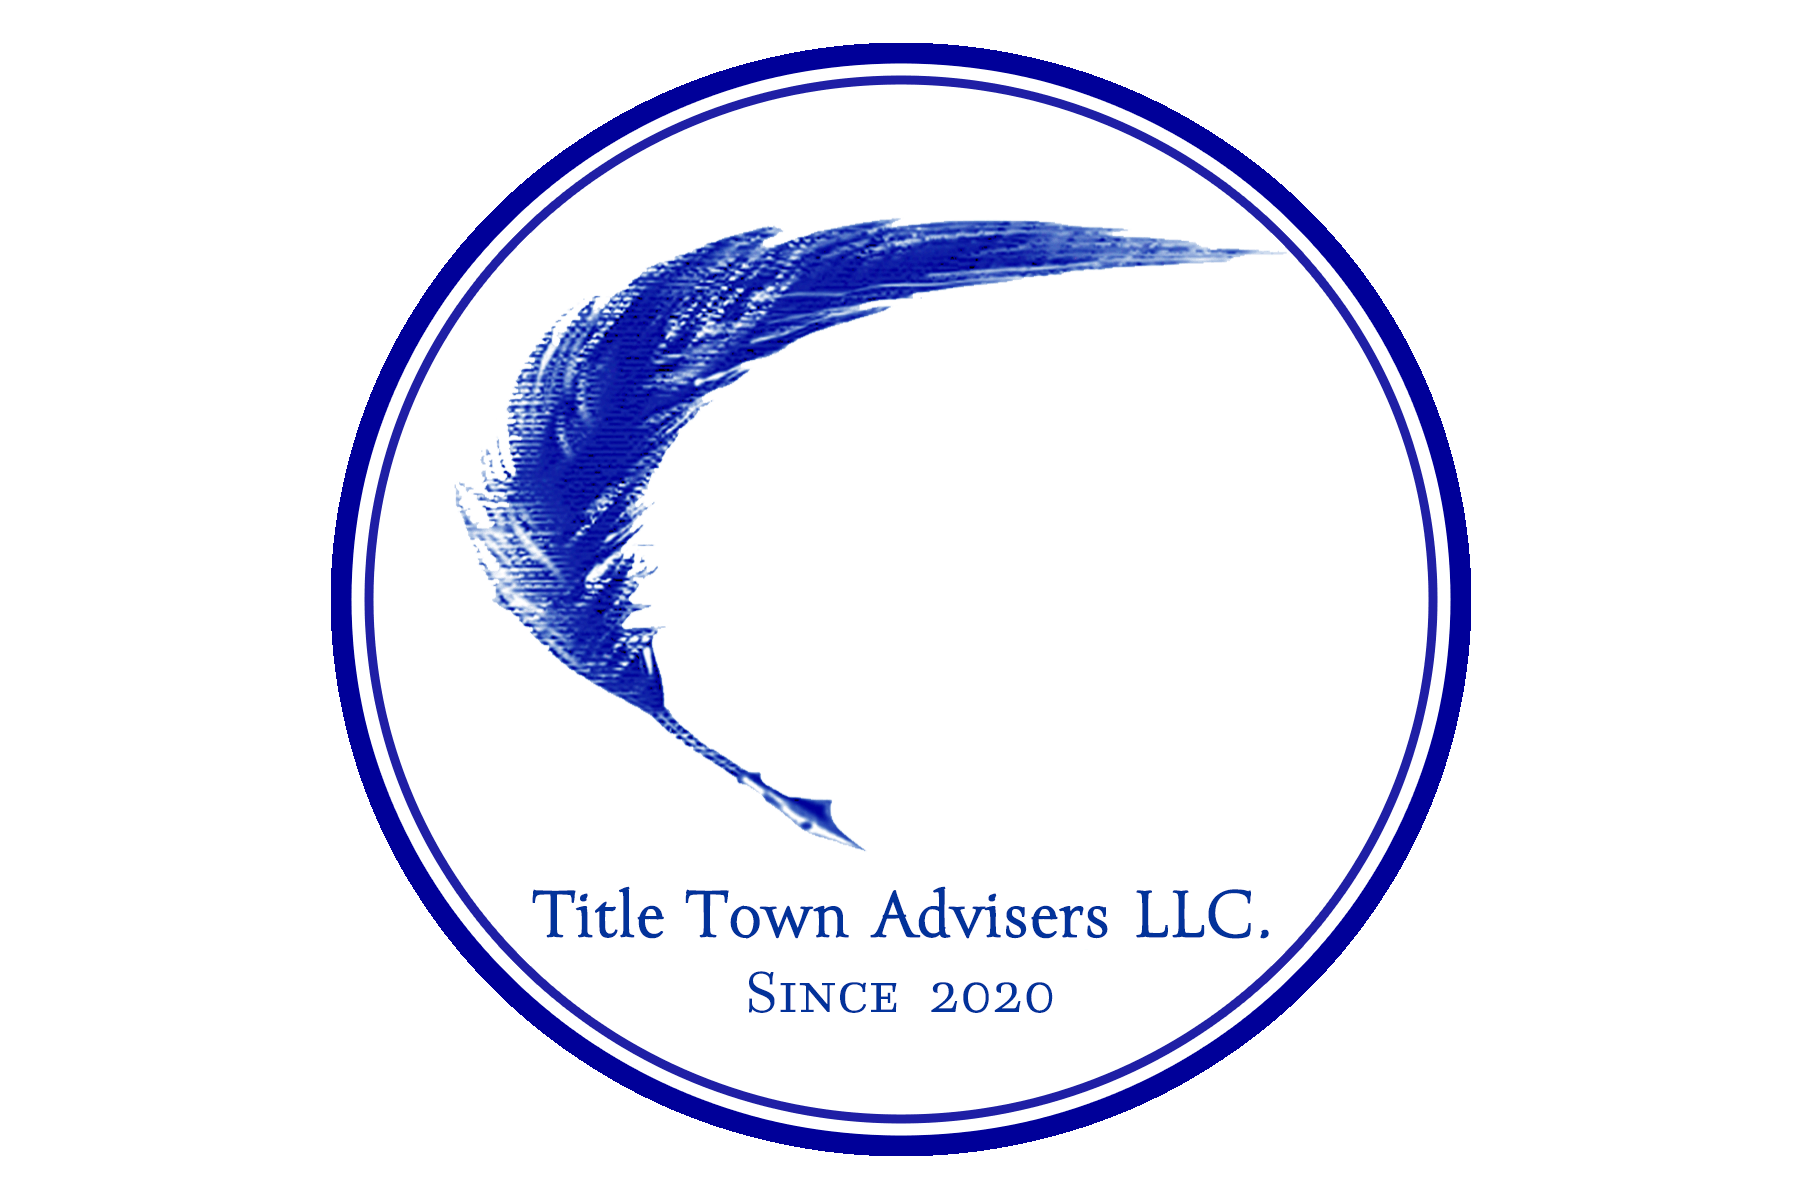 Title Town Advisers